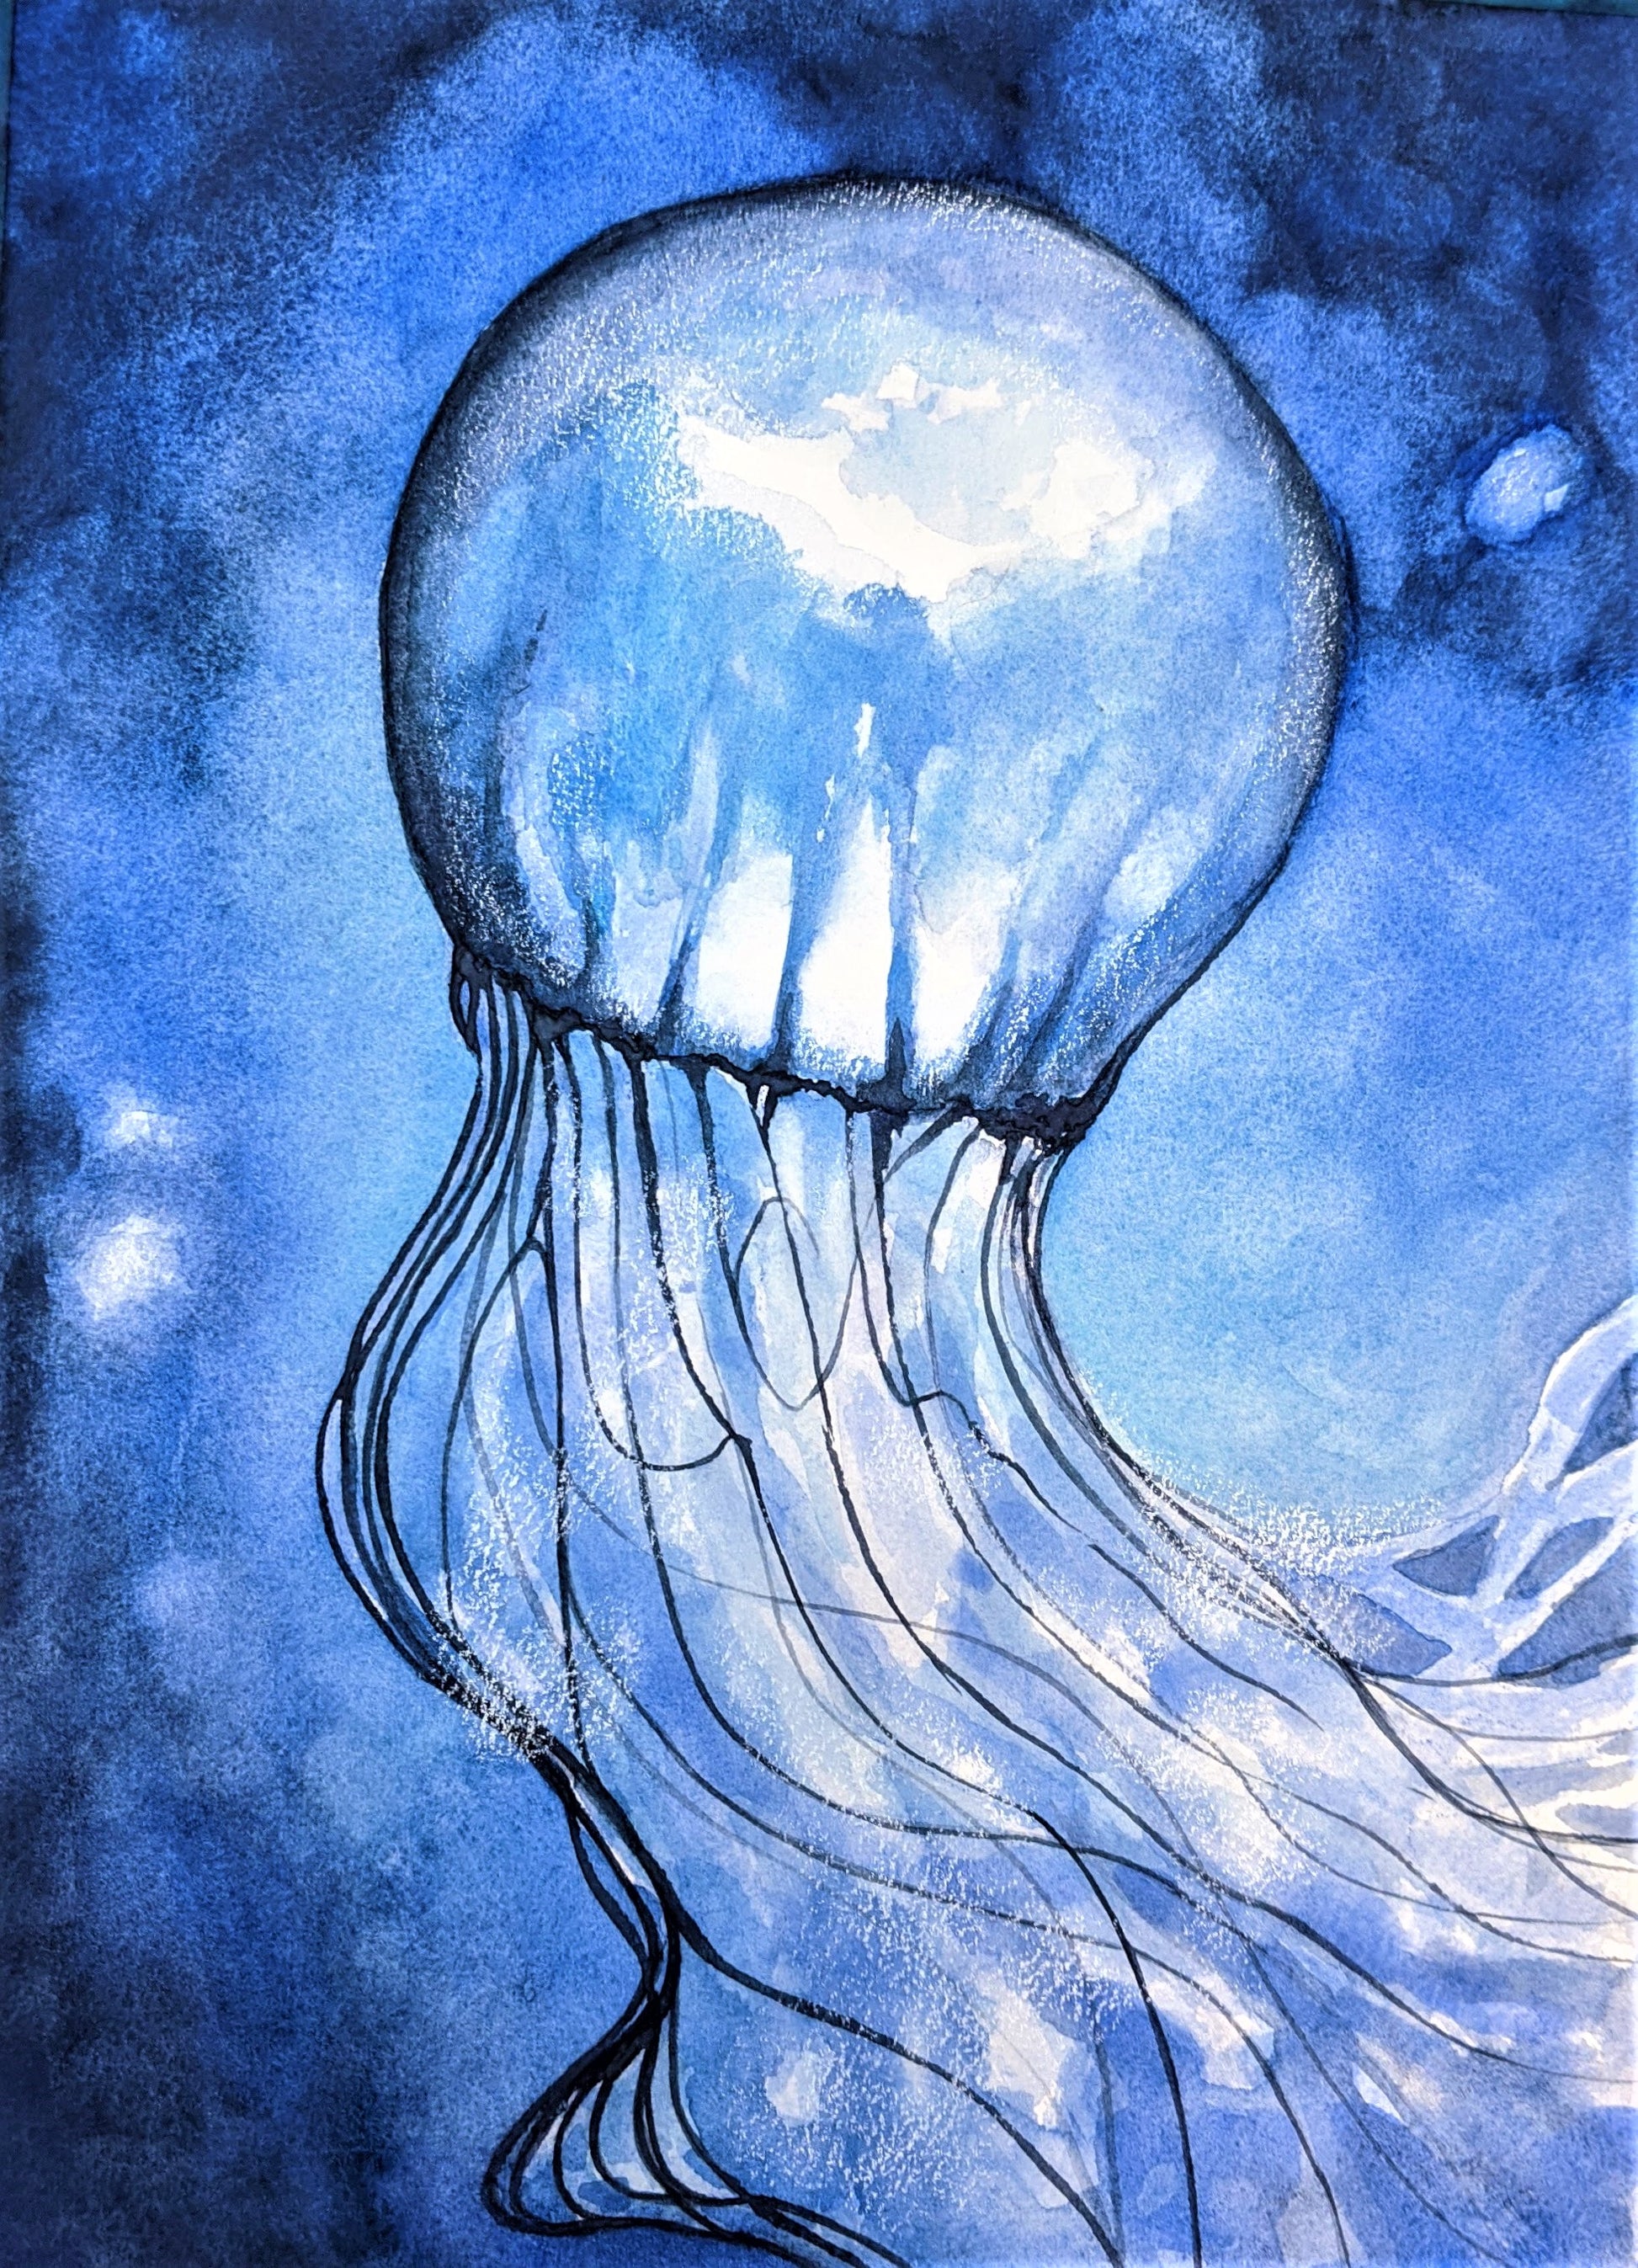 Jellyfish floating watercolor painting